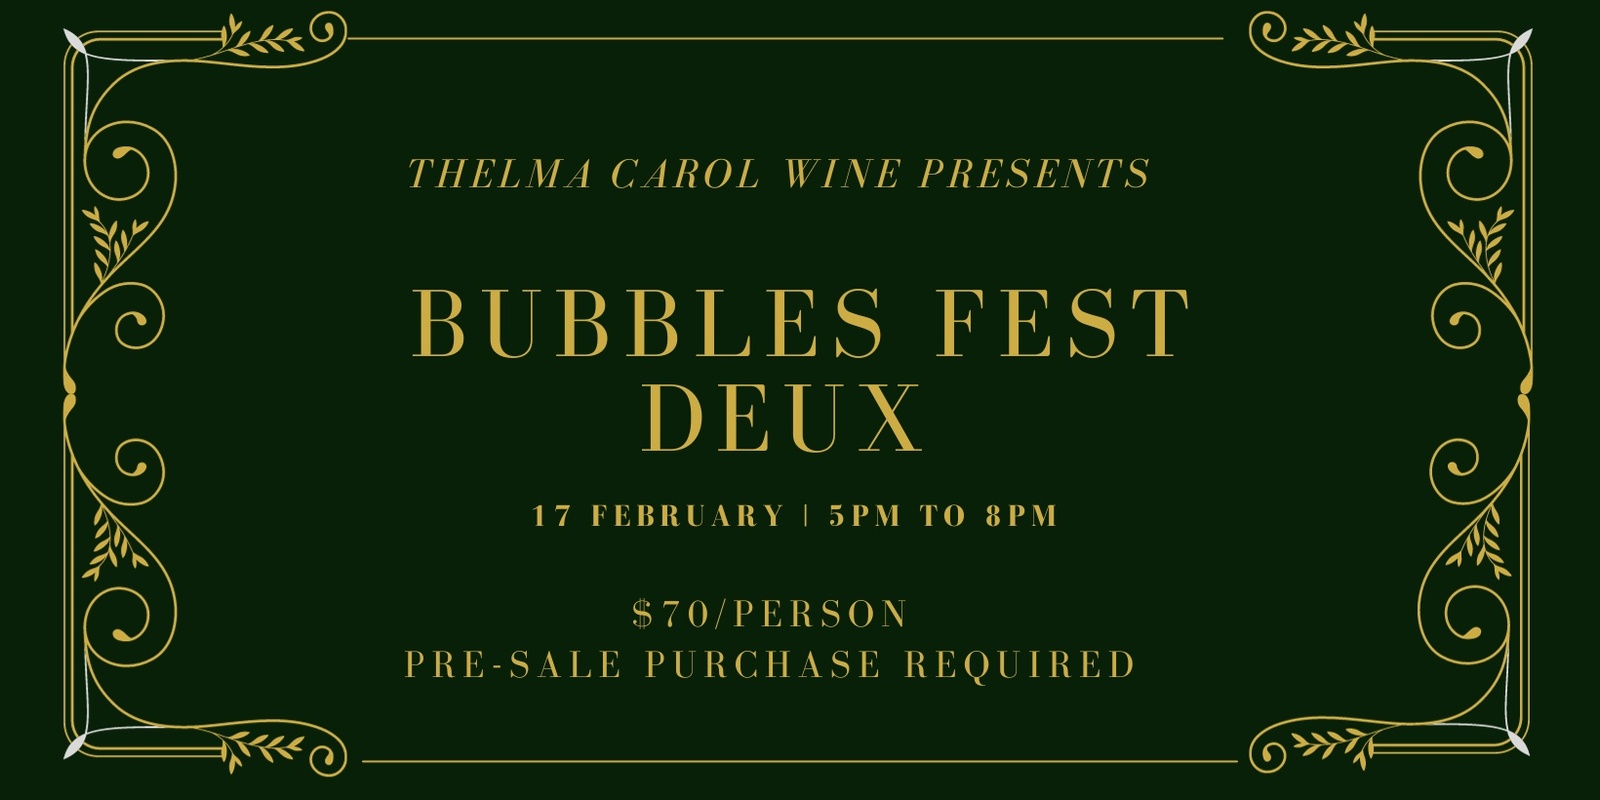 Banner image for Bubbles Fest Deux at Thelma Carol Wine